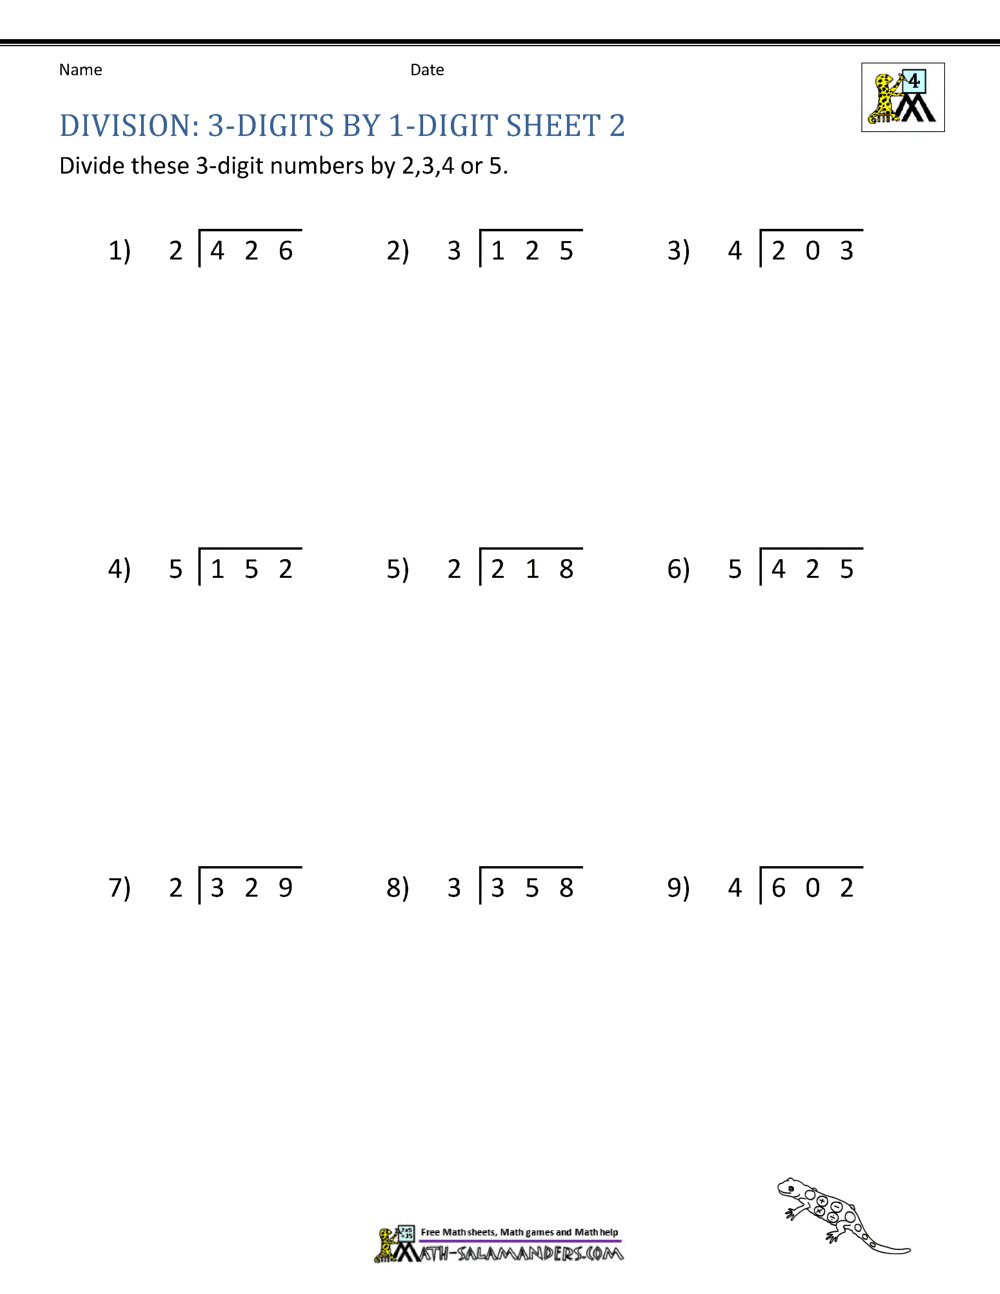 Free Division Worksheets education, learning, math worksheets, and grade worksheets Mathematics Division Worksheets 1294 x 1000